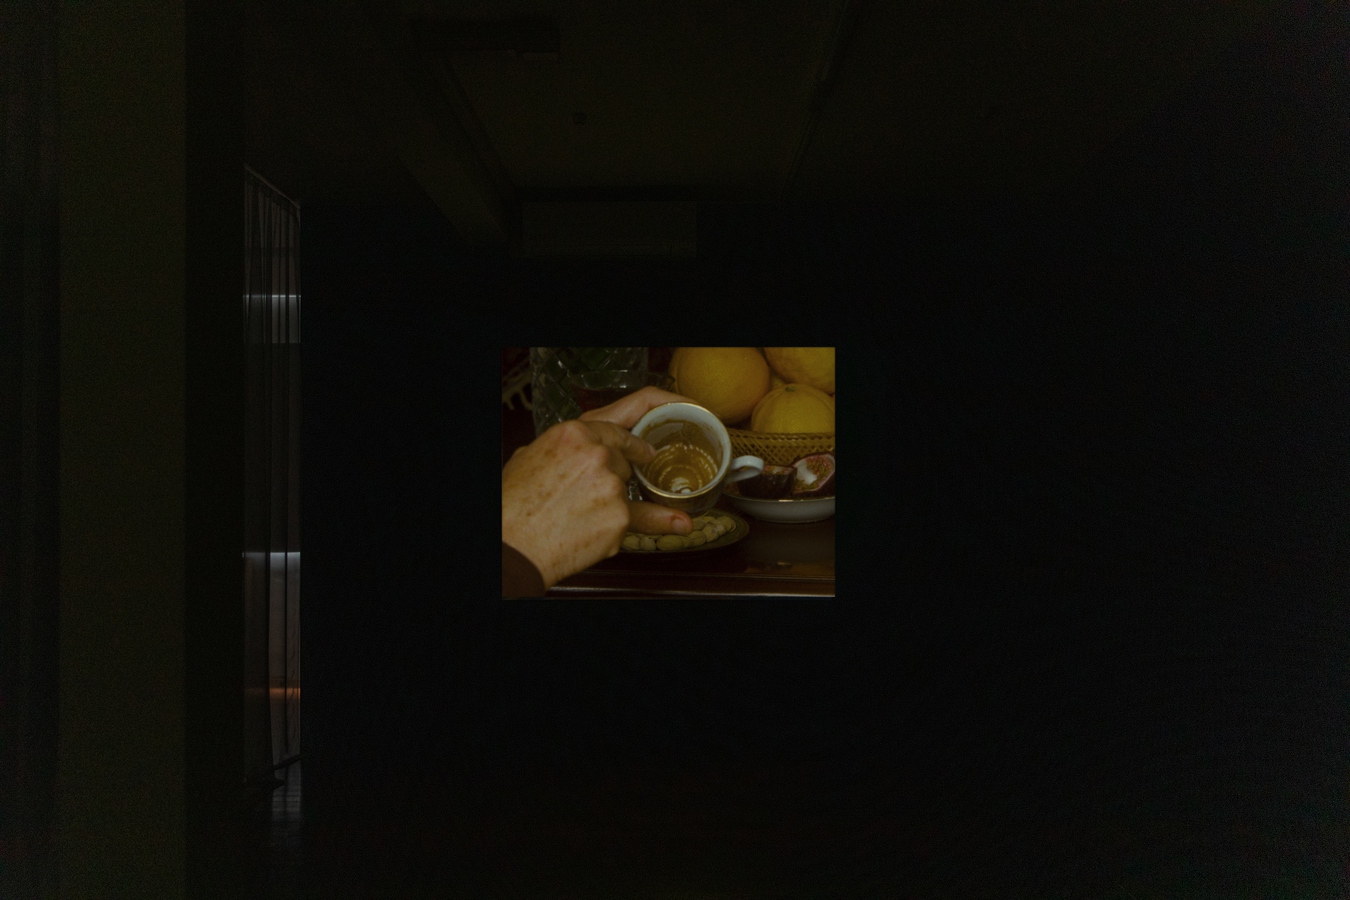 Image: Selina Ershadi, چشم چشمه (installation view), 2023. Two-channel video projection. 8:15 mins. Sound design by Frances Libeau. Photo by Nancy Zhou.